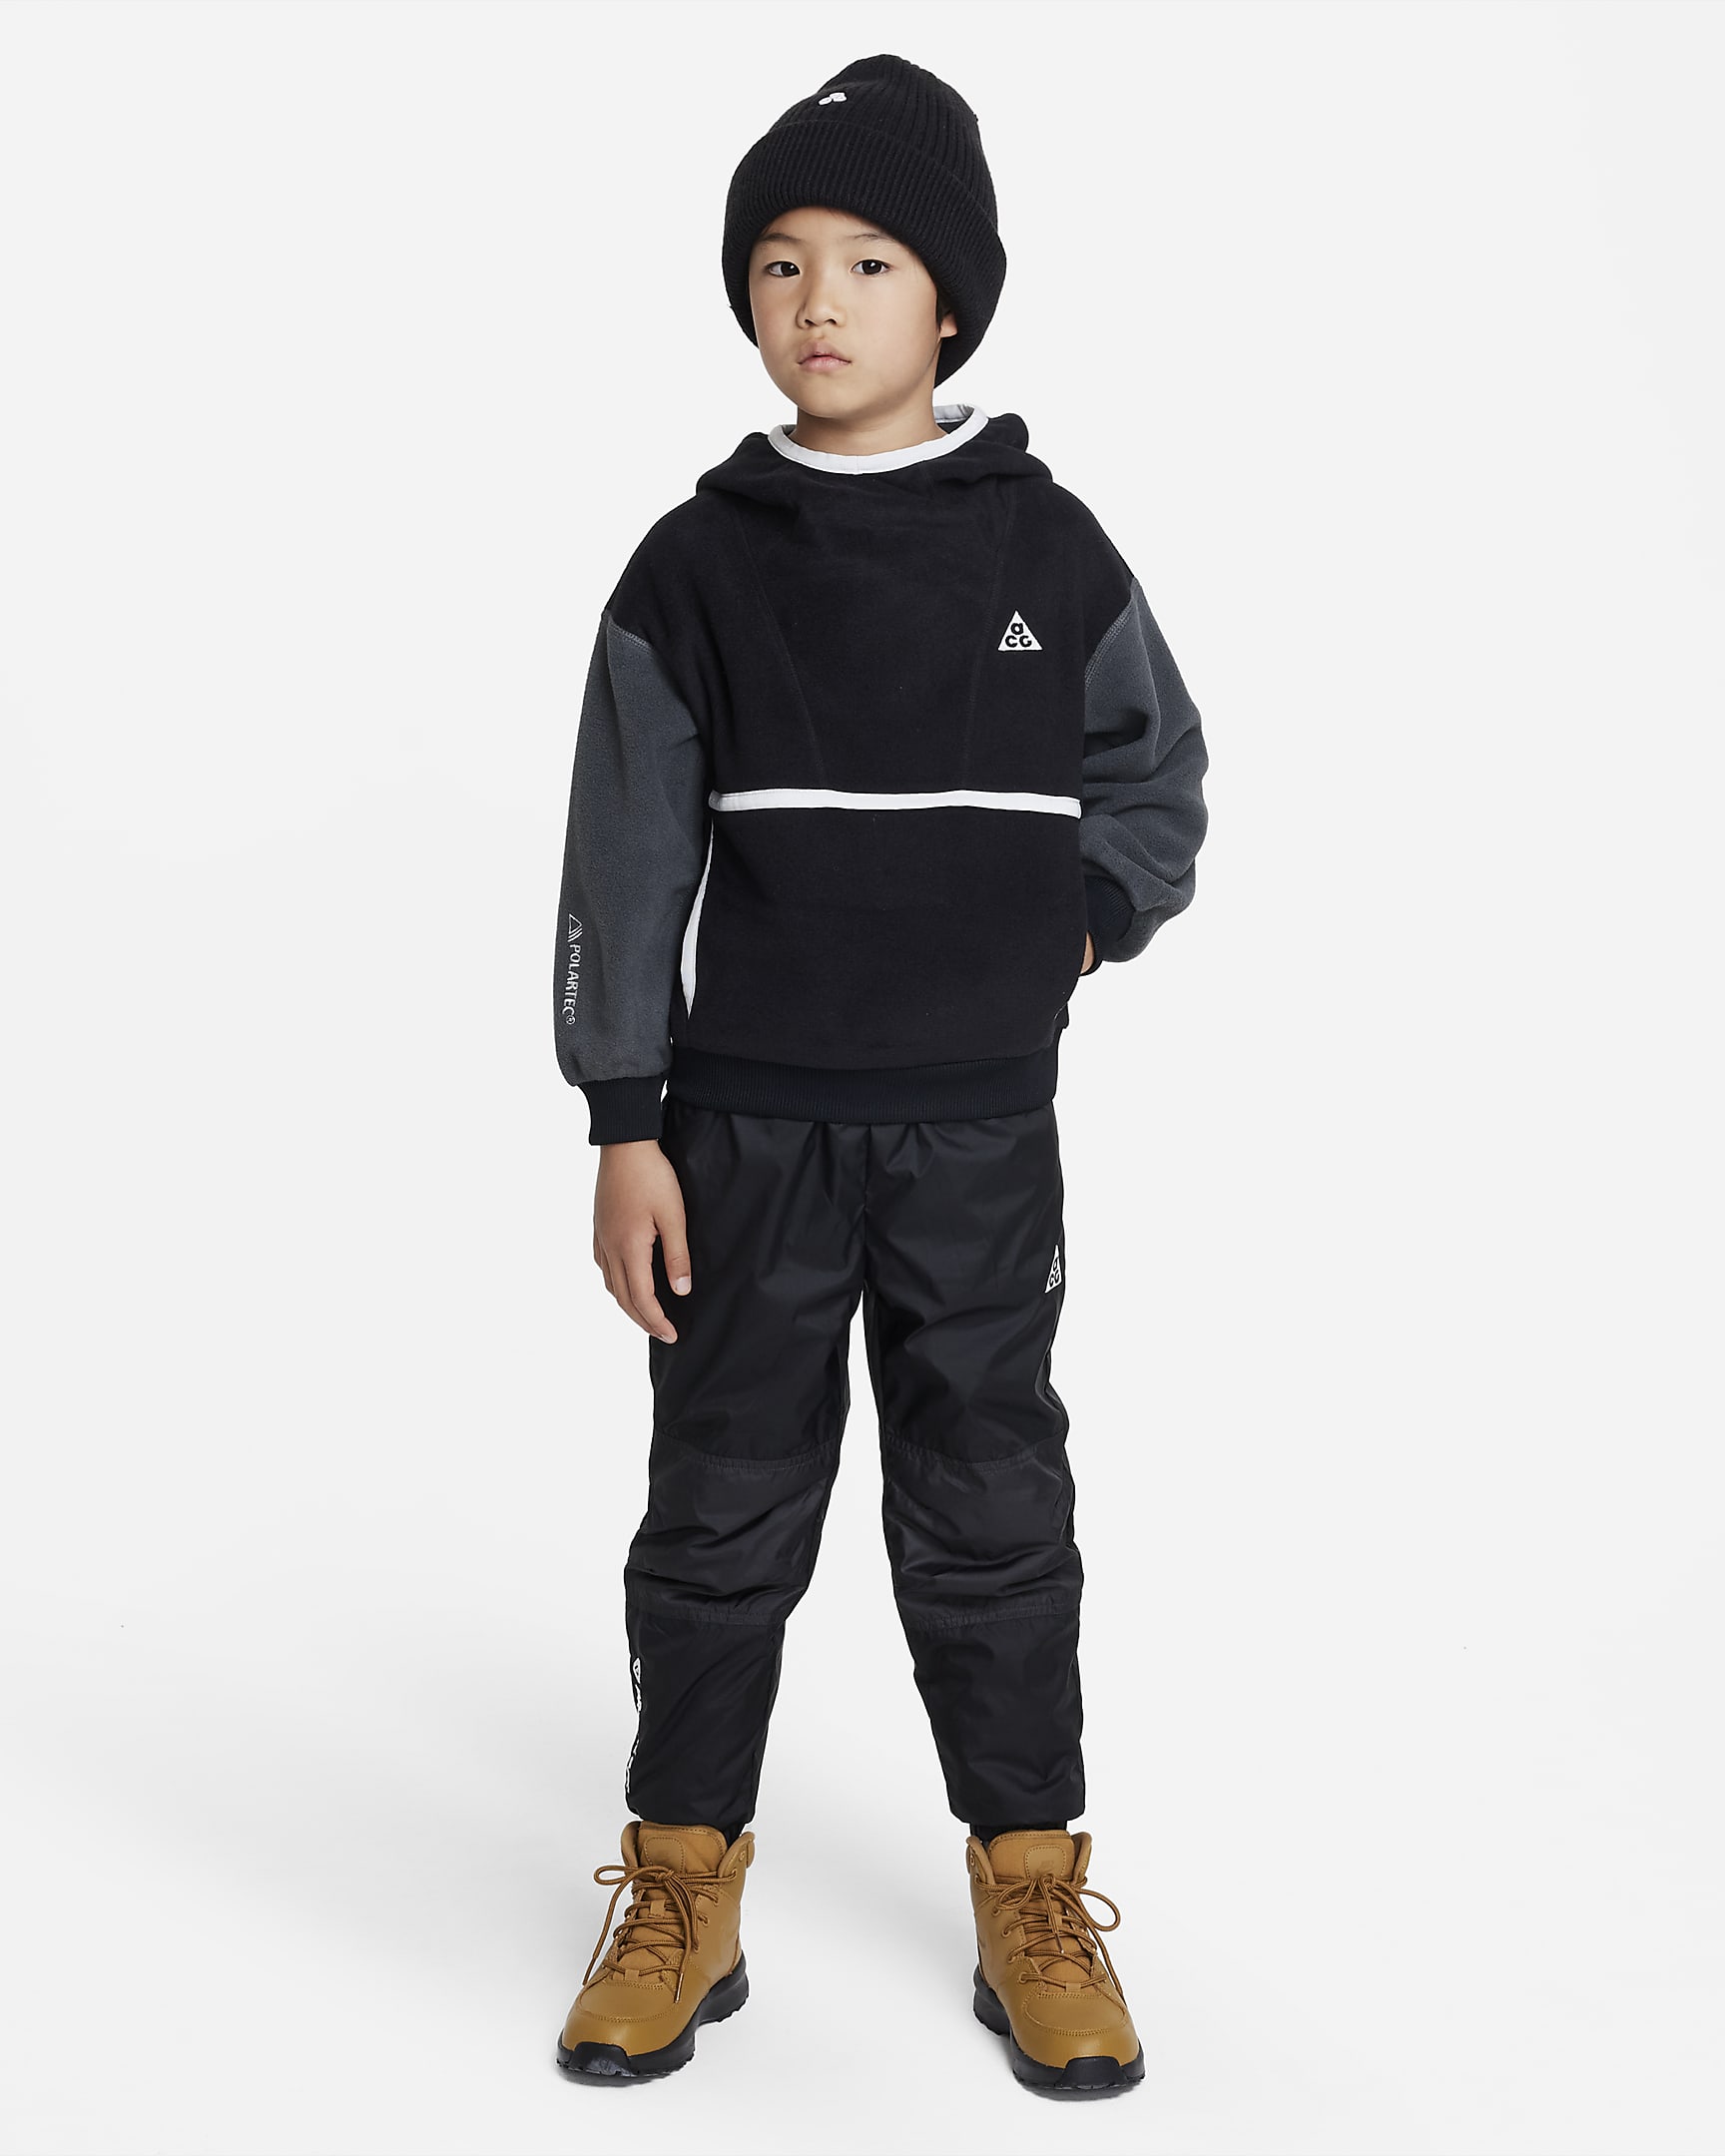 Nike ACG Polartec® 'Wolf Tree' Younger Kids' Pullover Hoodie - Black